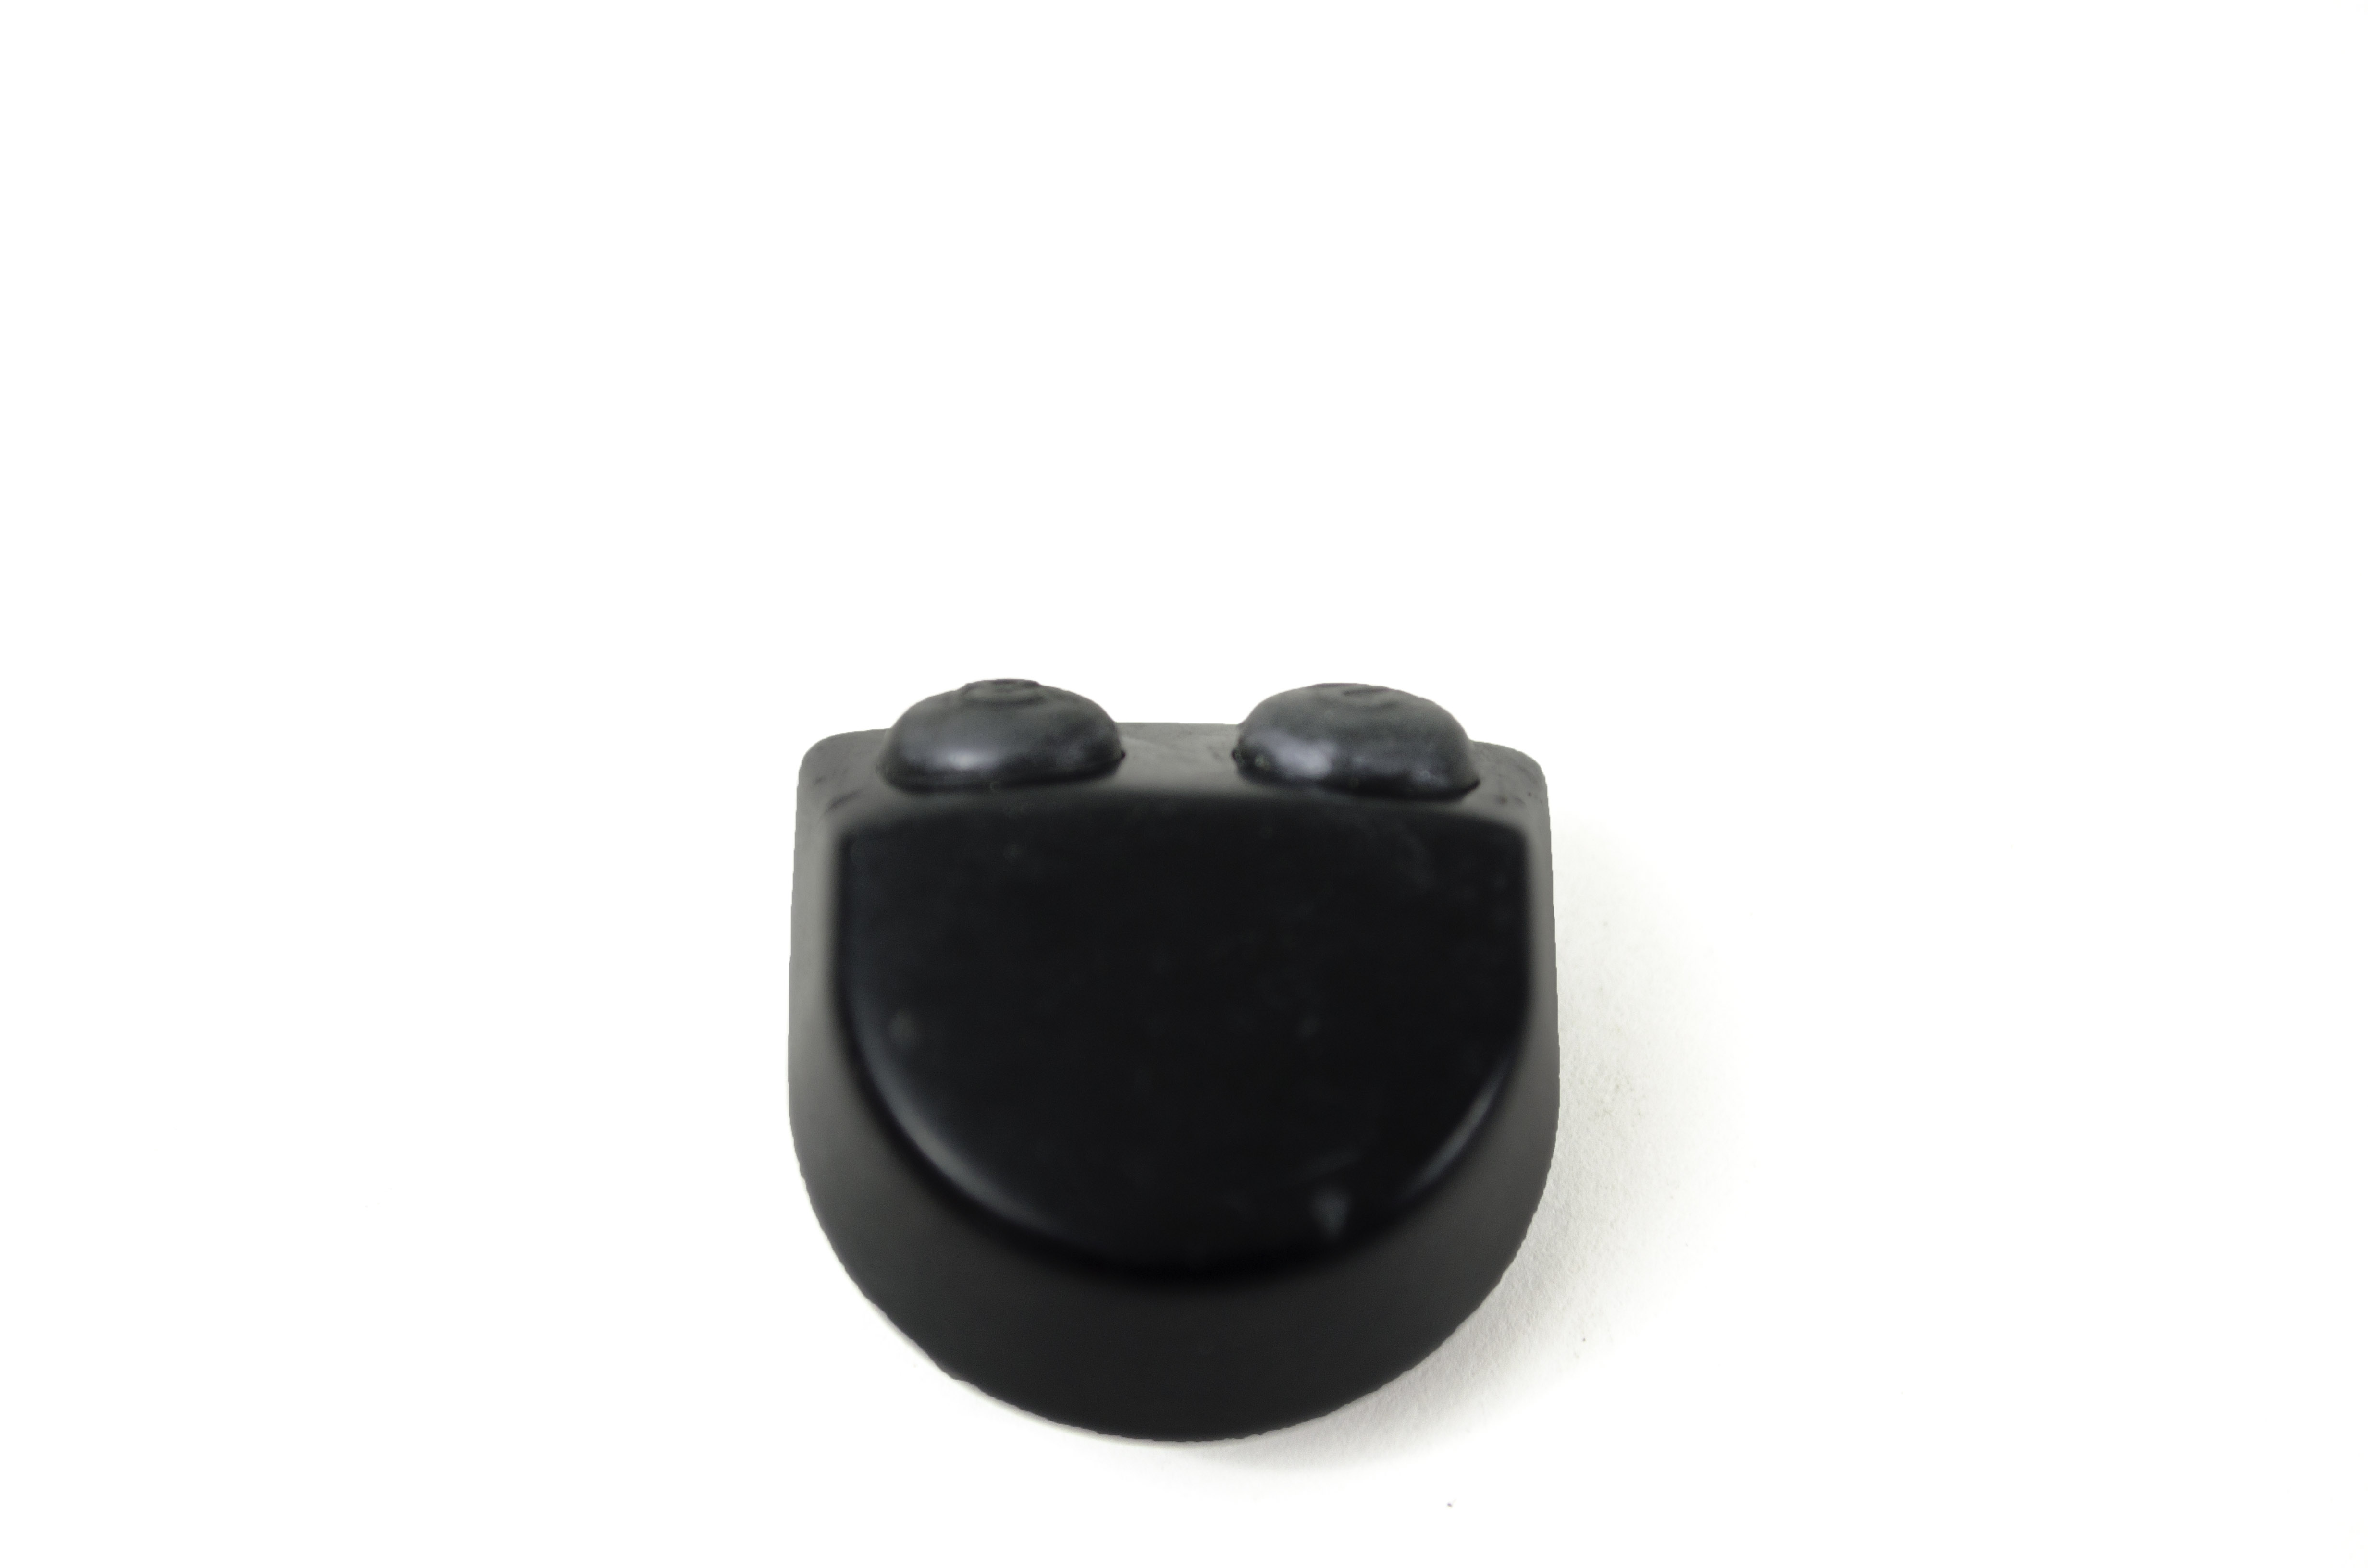 OEM Headswitch Cover - ENF-VT2, CYF-VA2